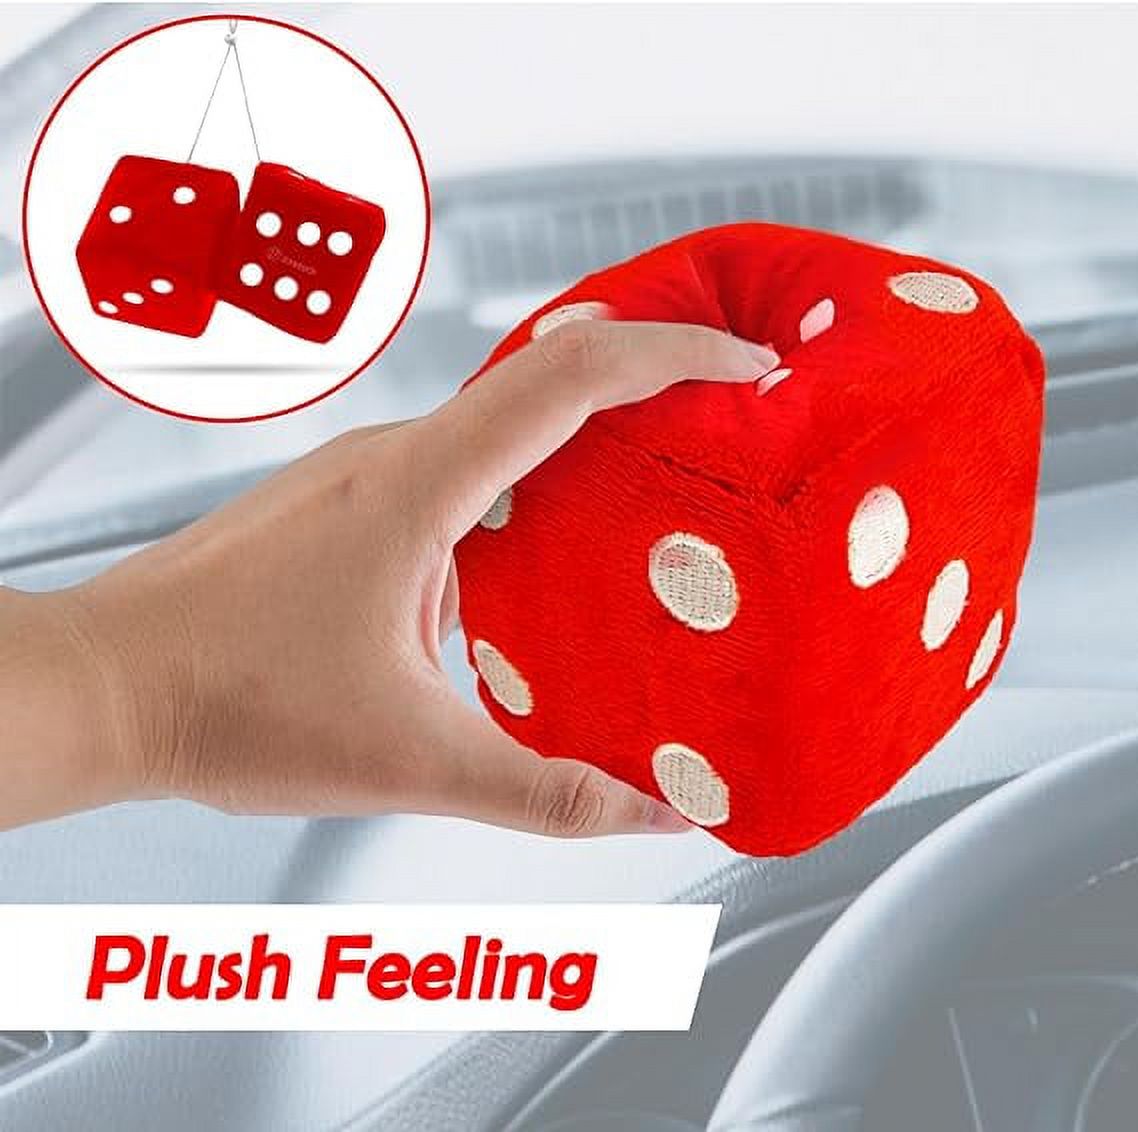 Zone Tech Car Decorative Hanging Mirror Fuzzy Dice Pair Accessories, Red 3” - image 5 of 13